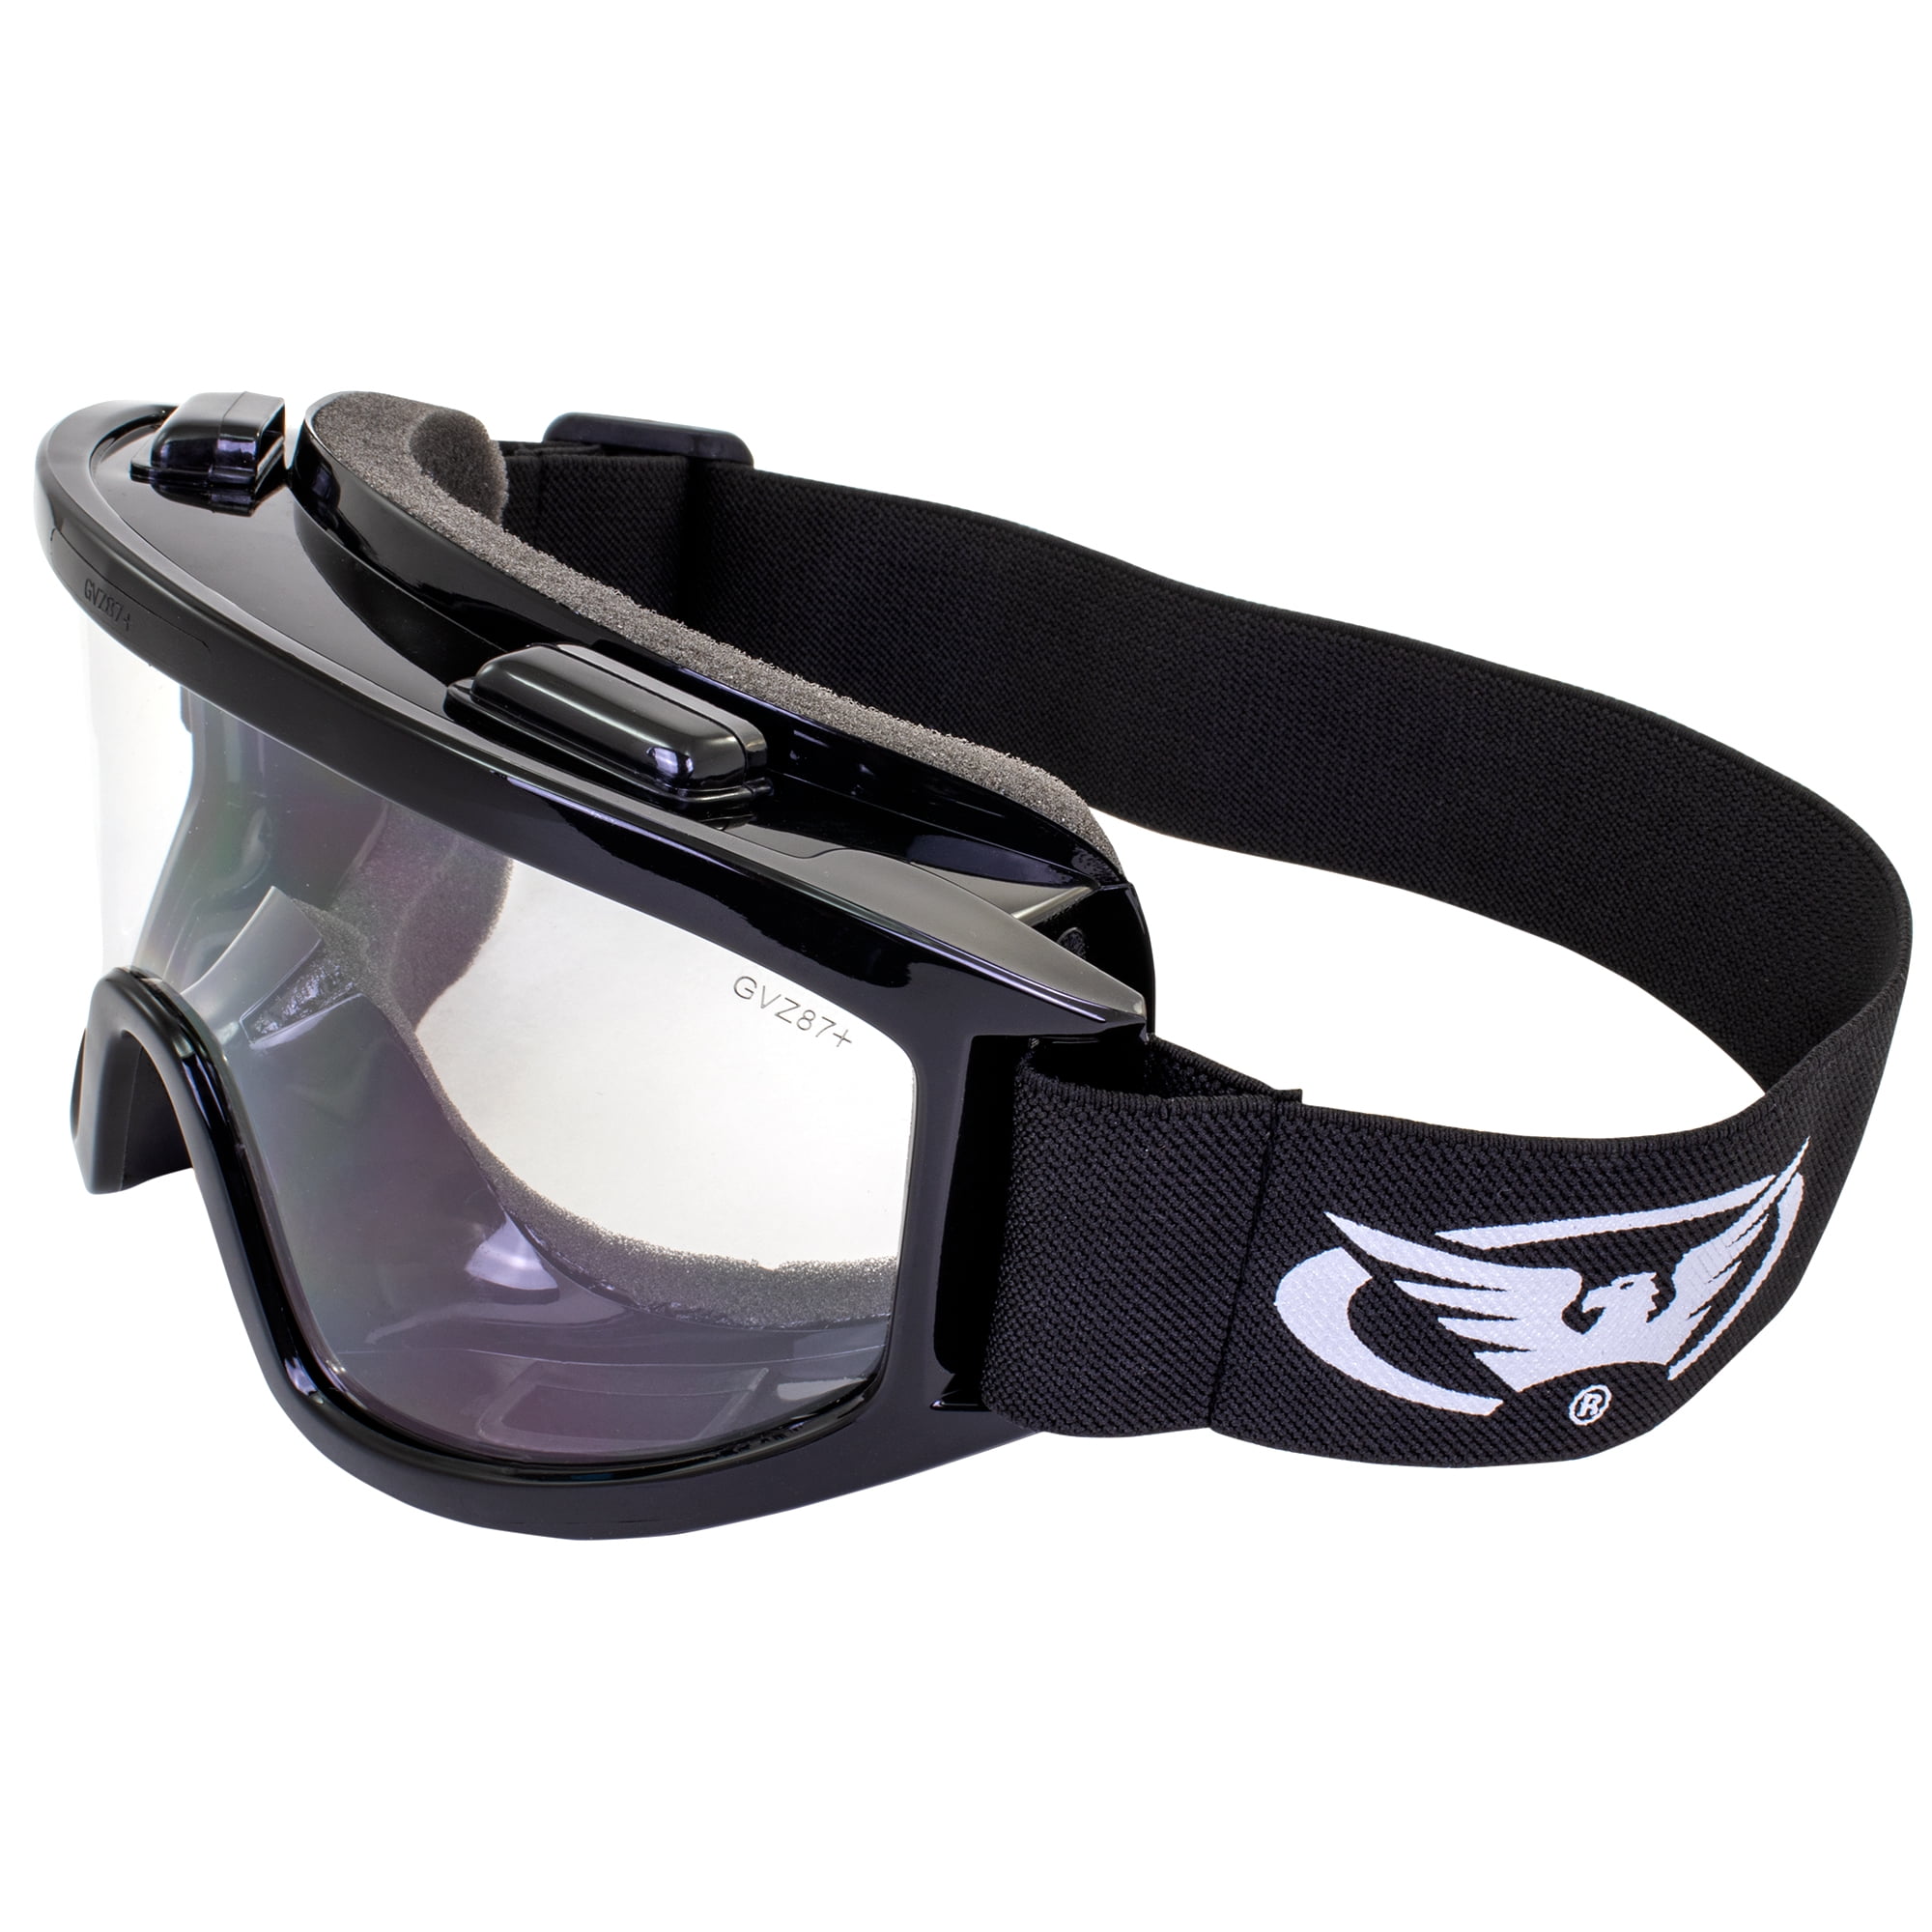 Freehawk Motorcycle Goggles Adult ATV Dirt Bike Off Road Racing MX Riding Goggle